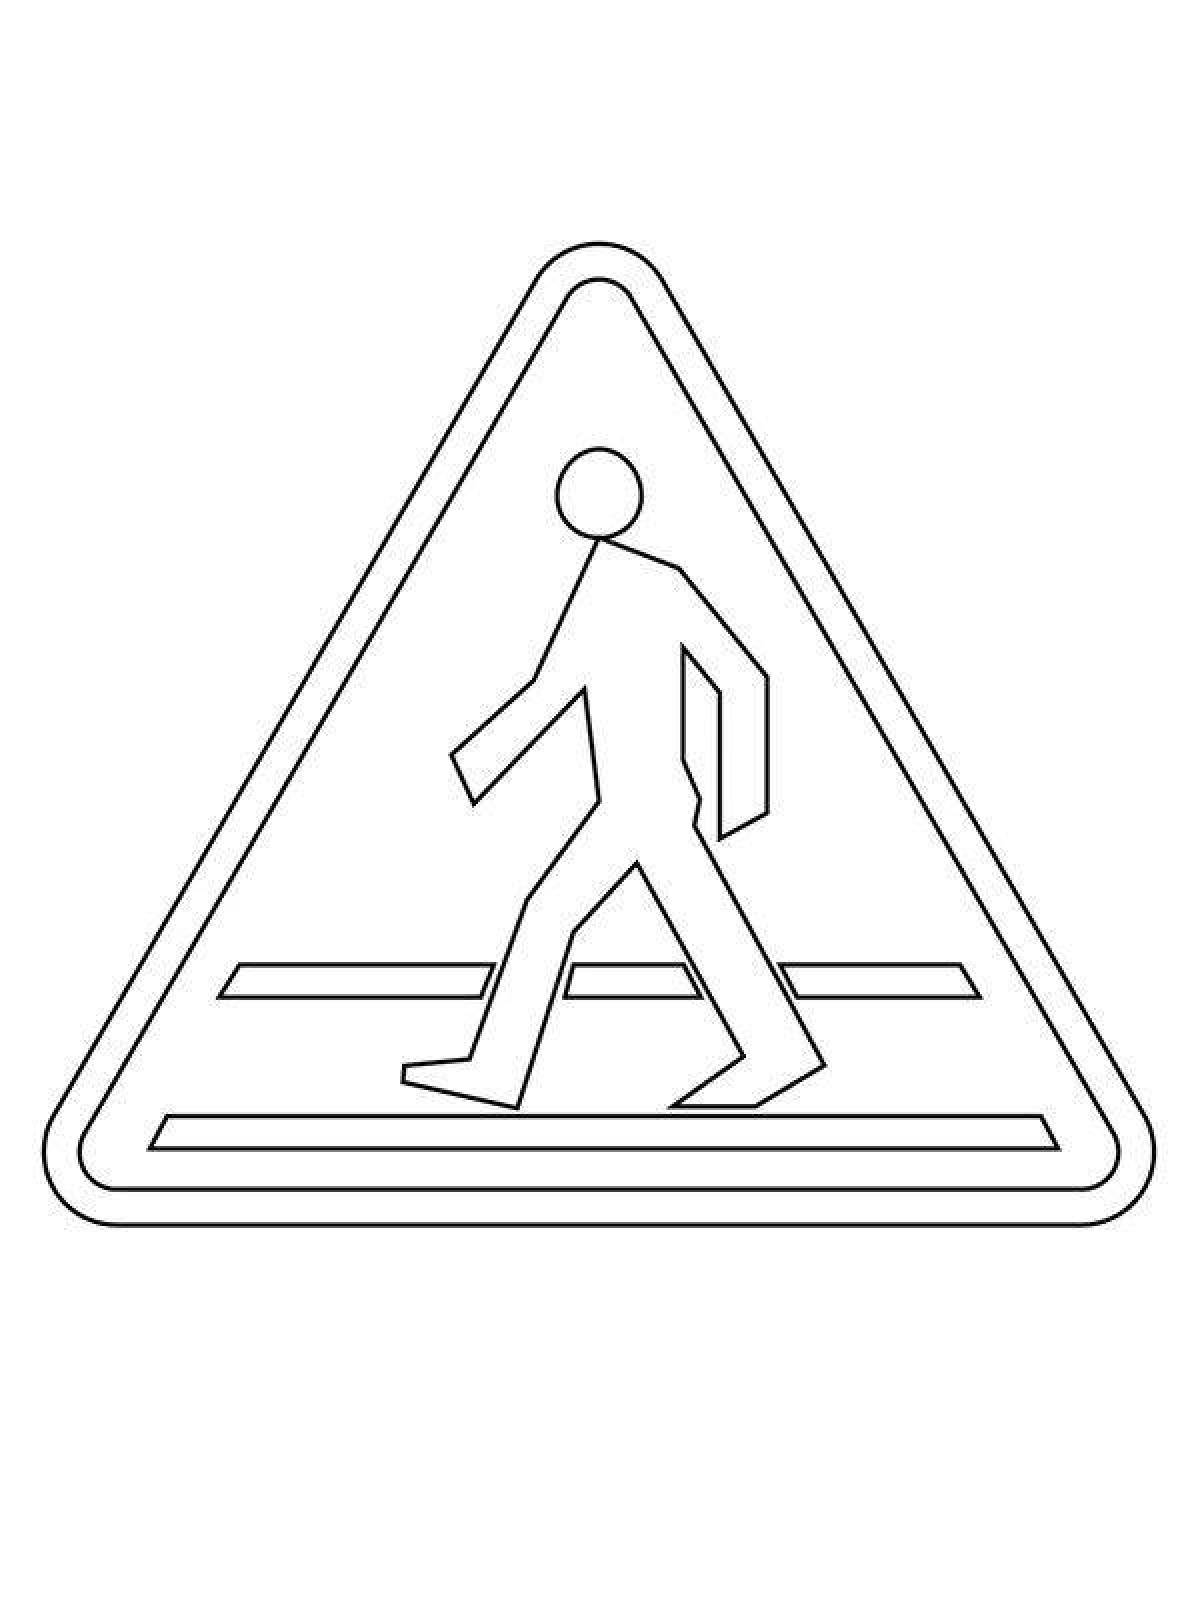 Coloring page charming crosswalk